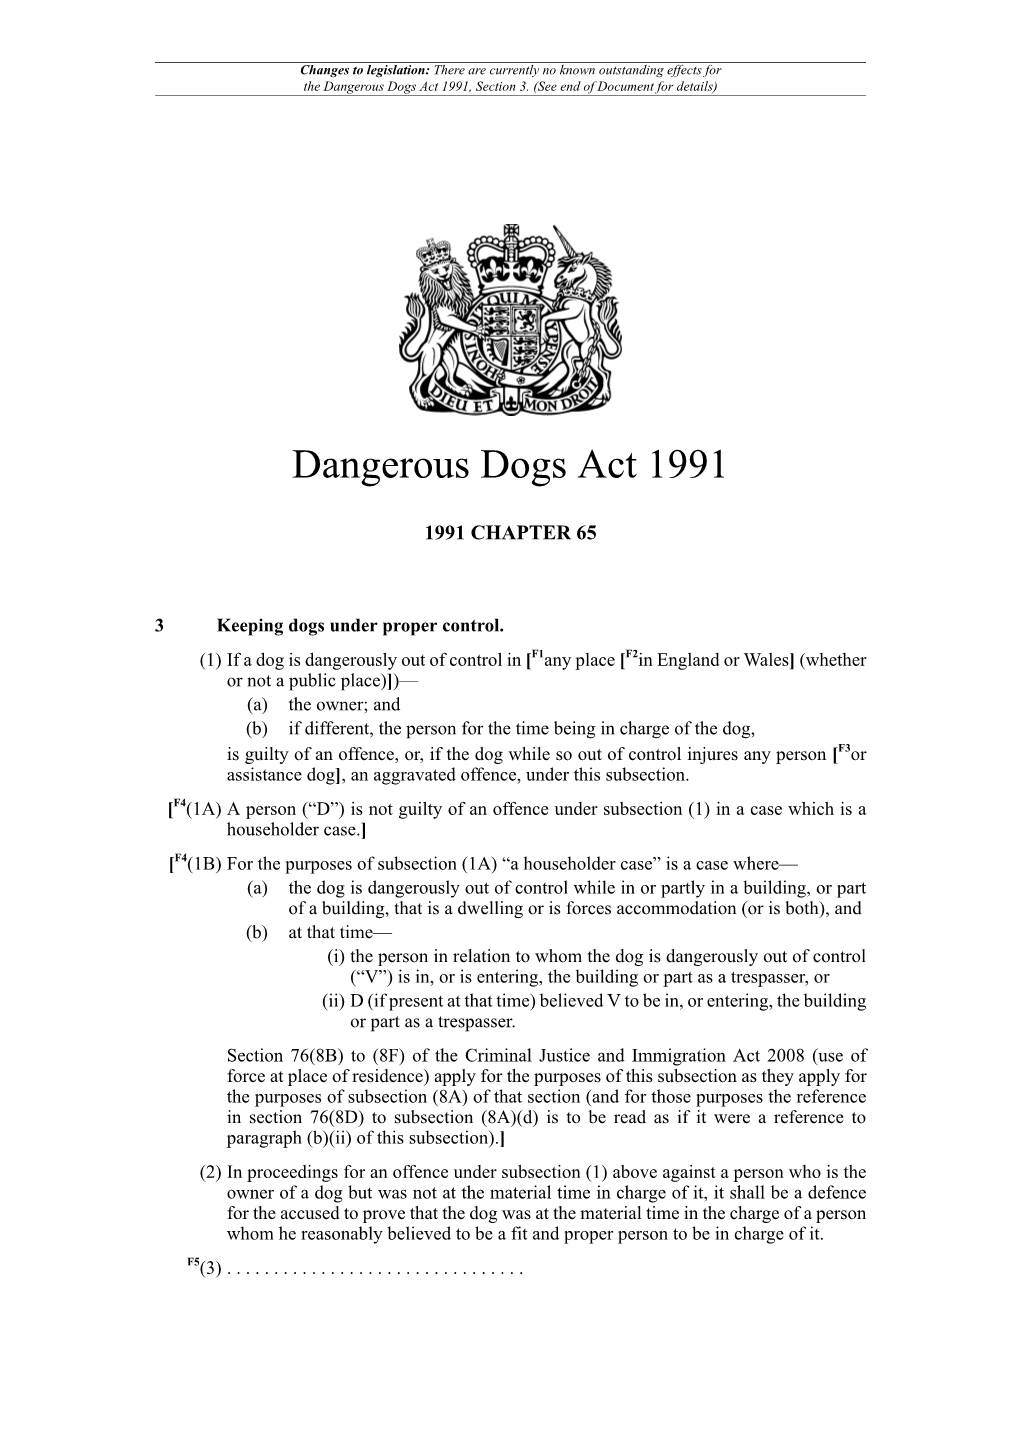 Dangerous Dogs Act 1991, Section 3